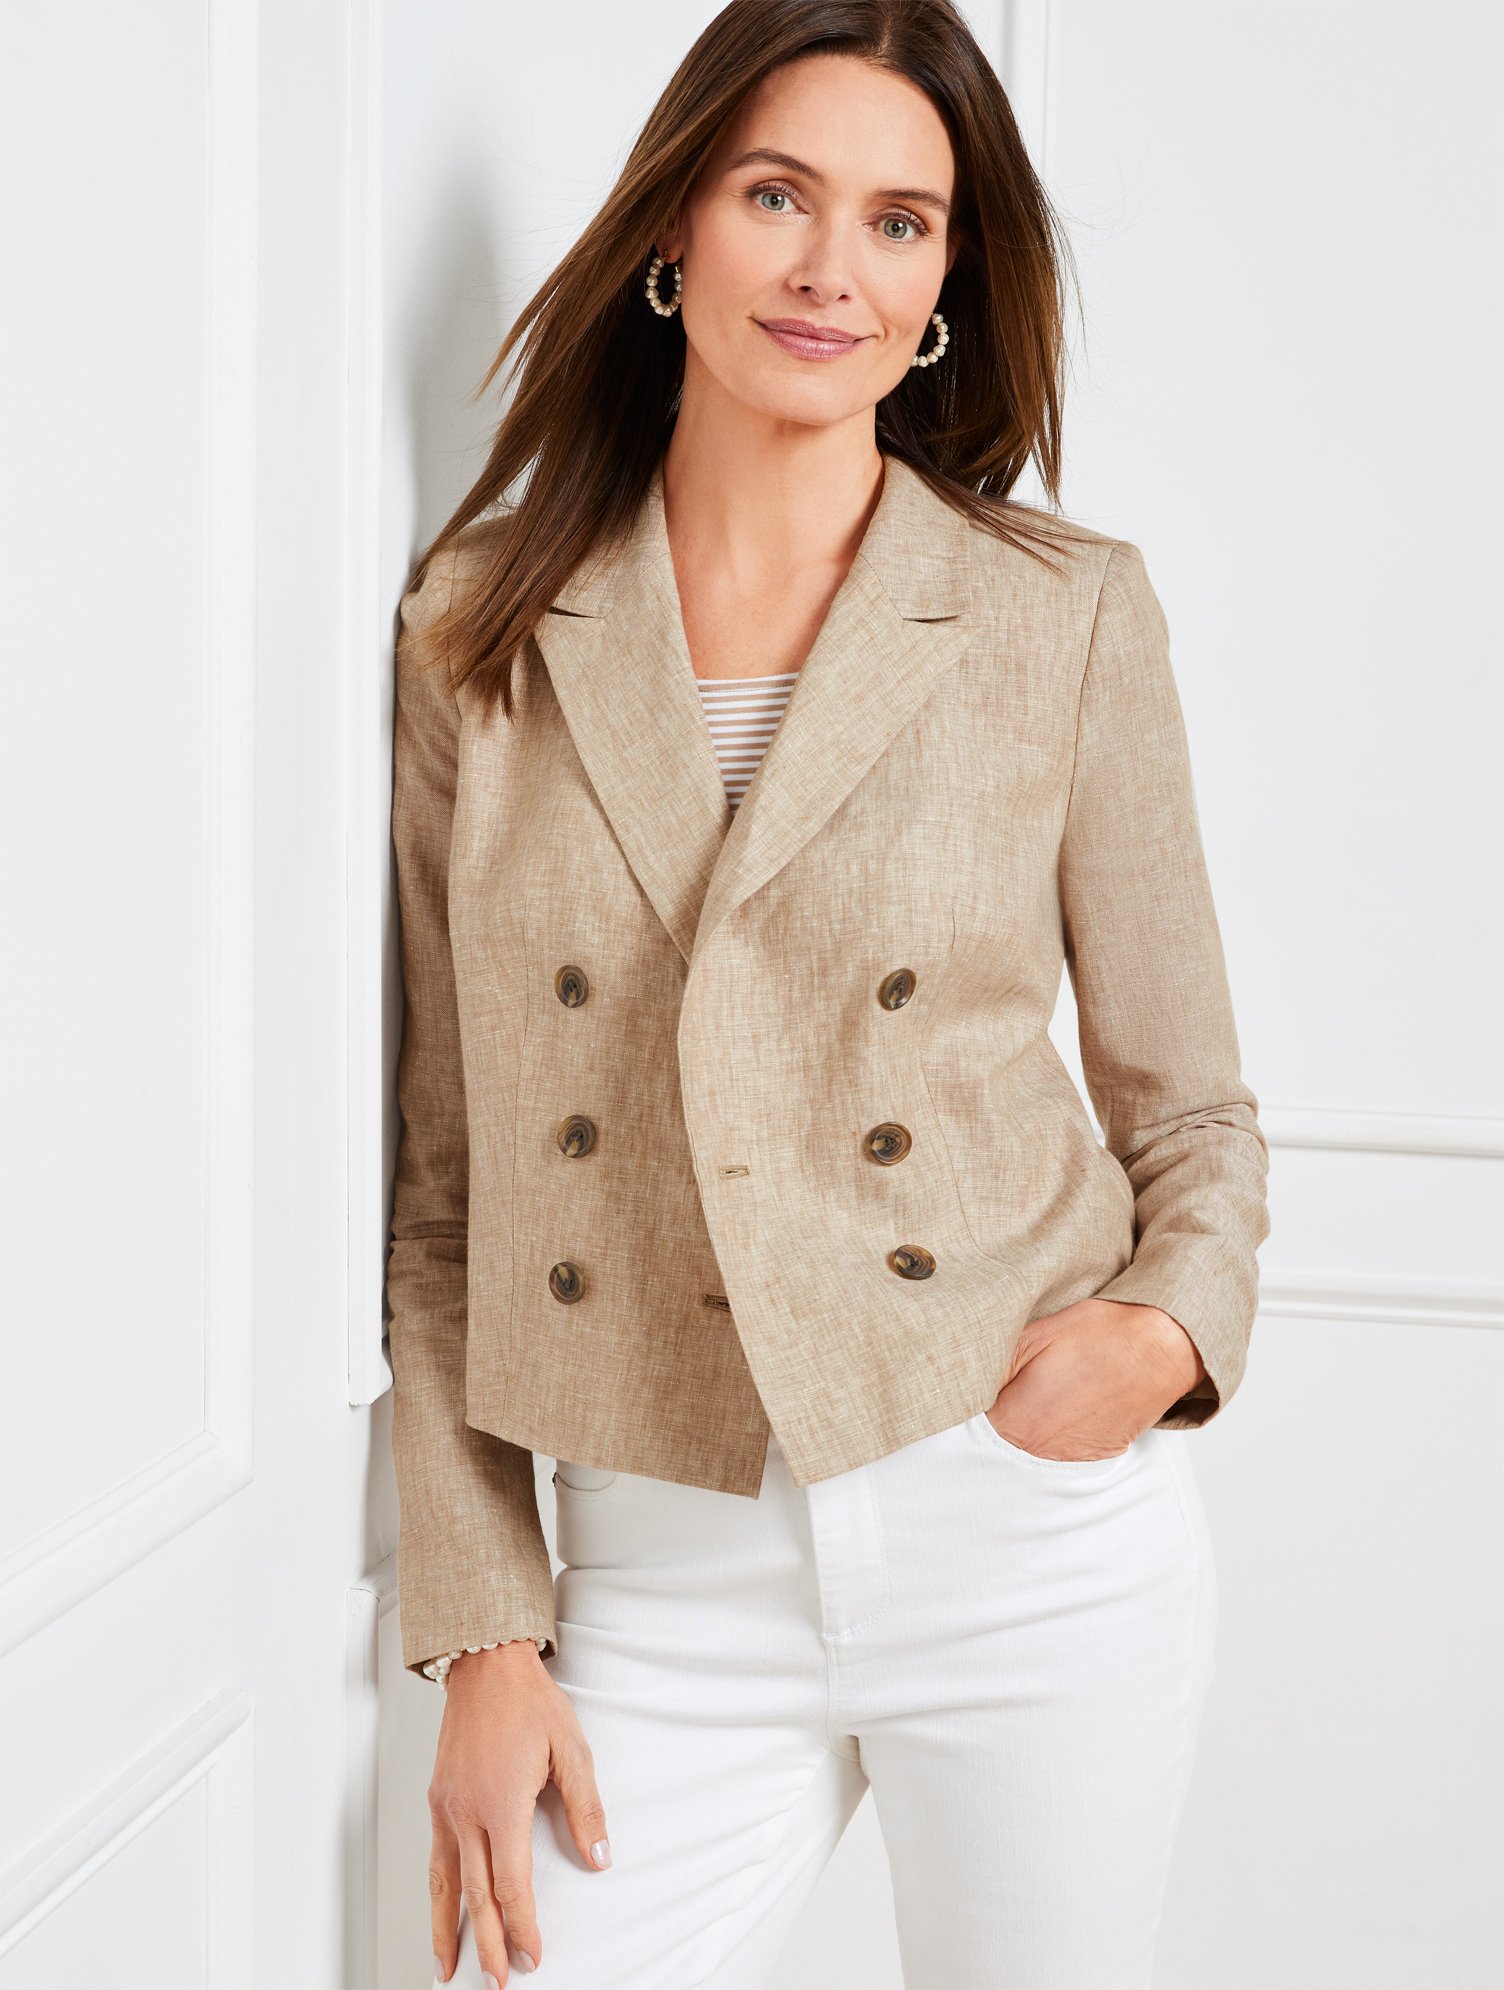 Talbots Cropped Linen Jacket - Taupe/white - 18  In Taupe,white